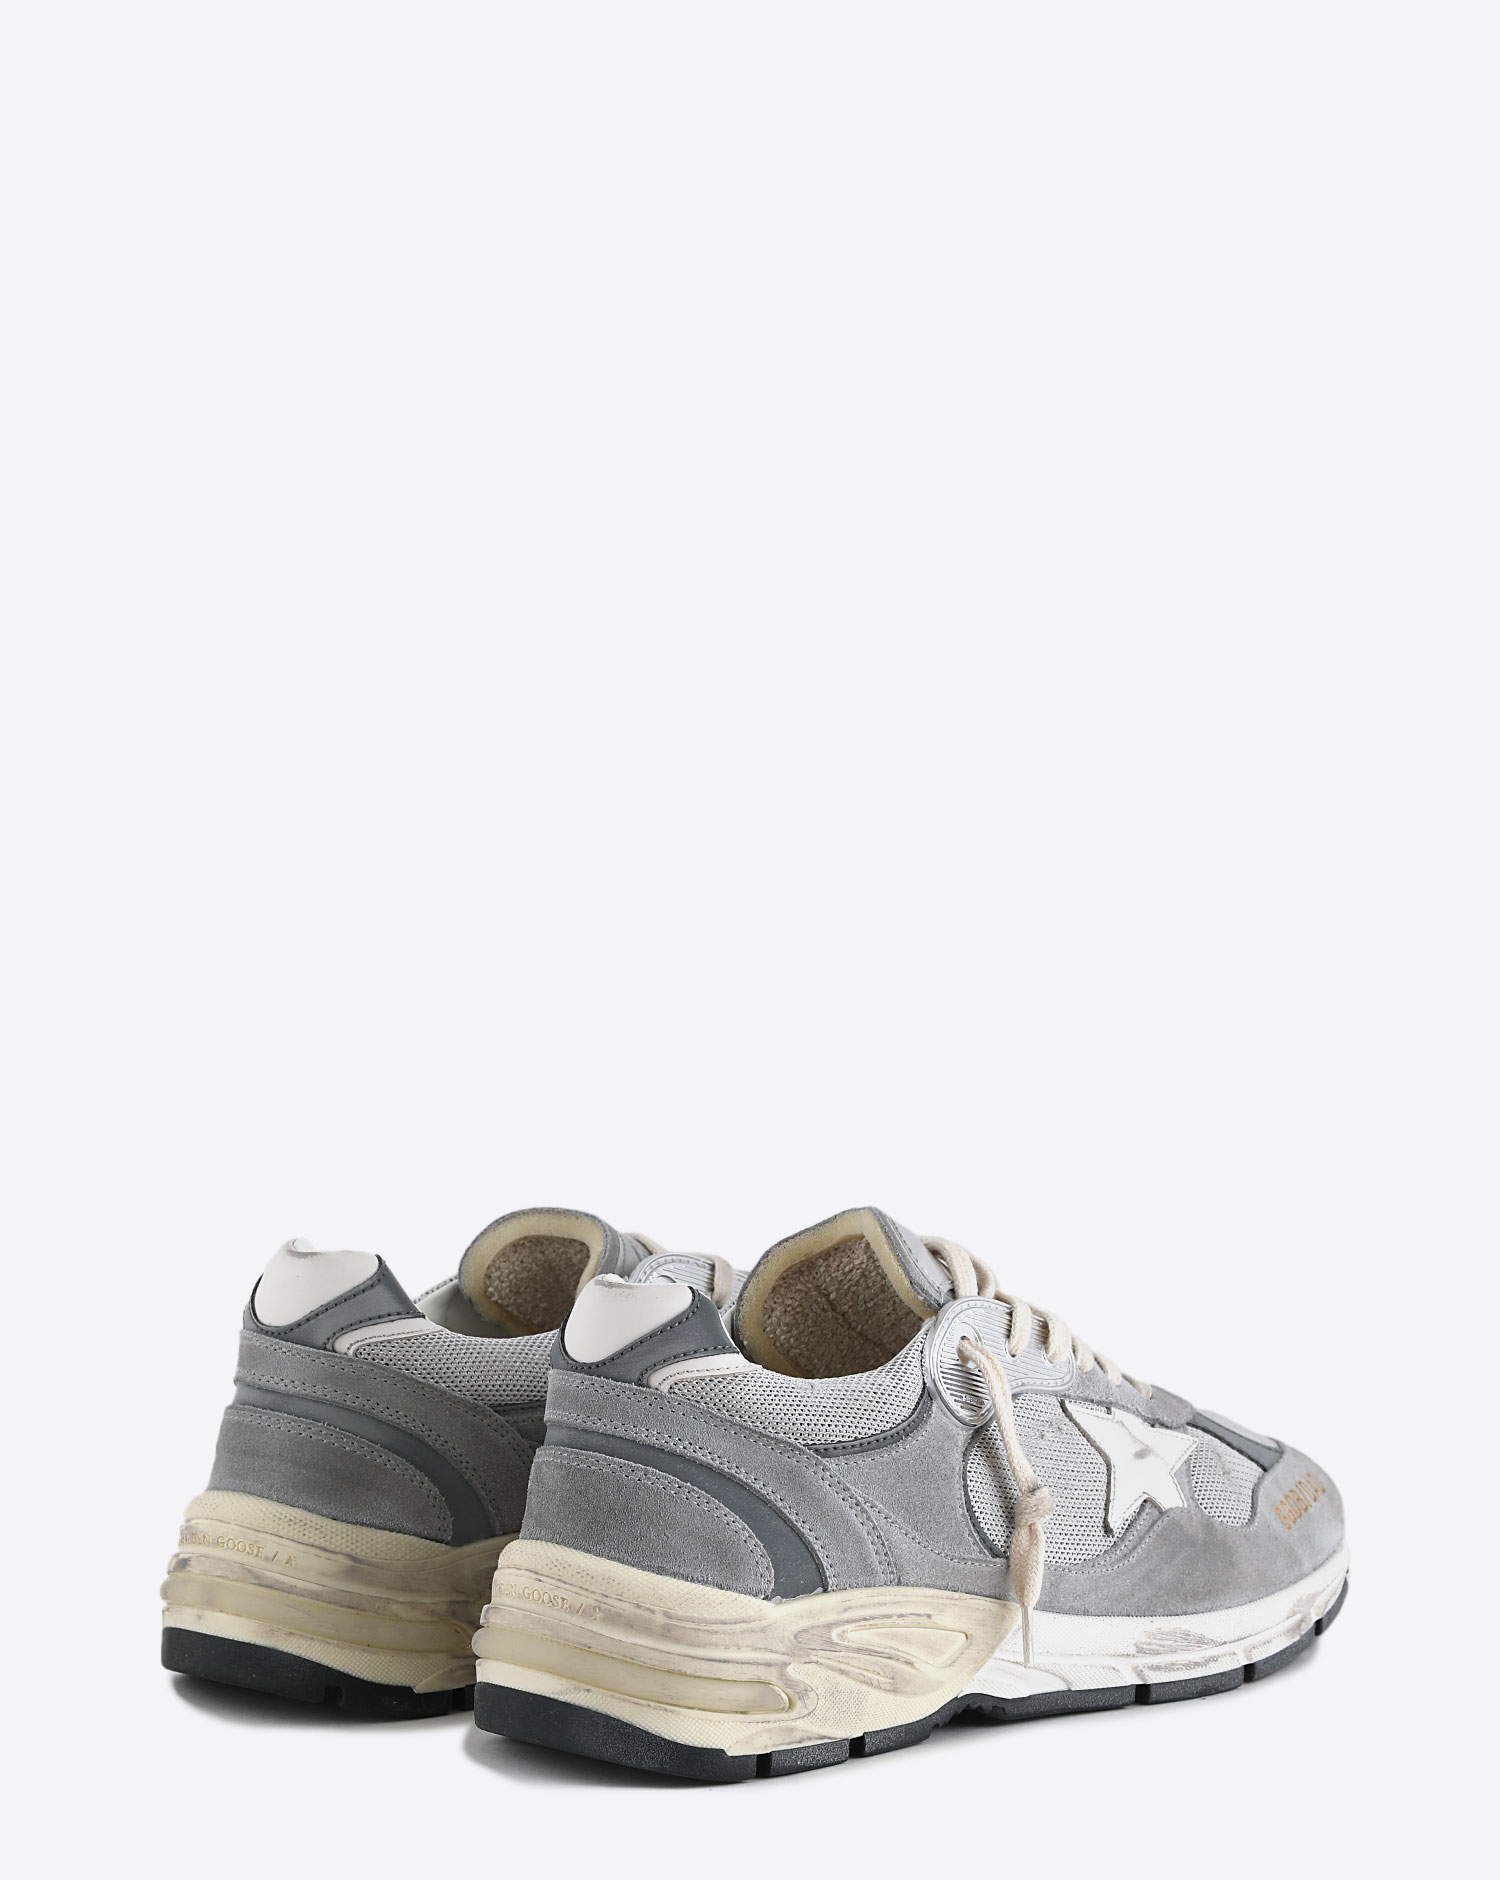 Golden Goose Homme Sneakers  Running Dad Grey Silver White 60379 